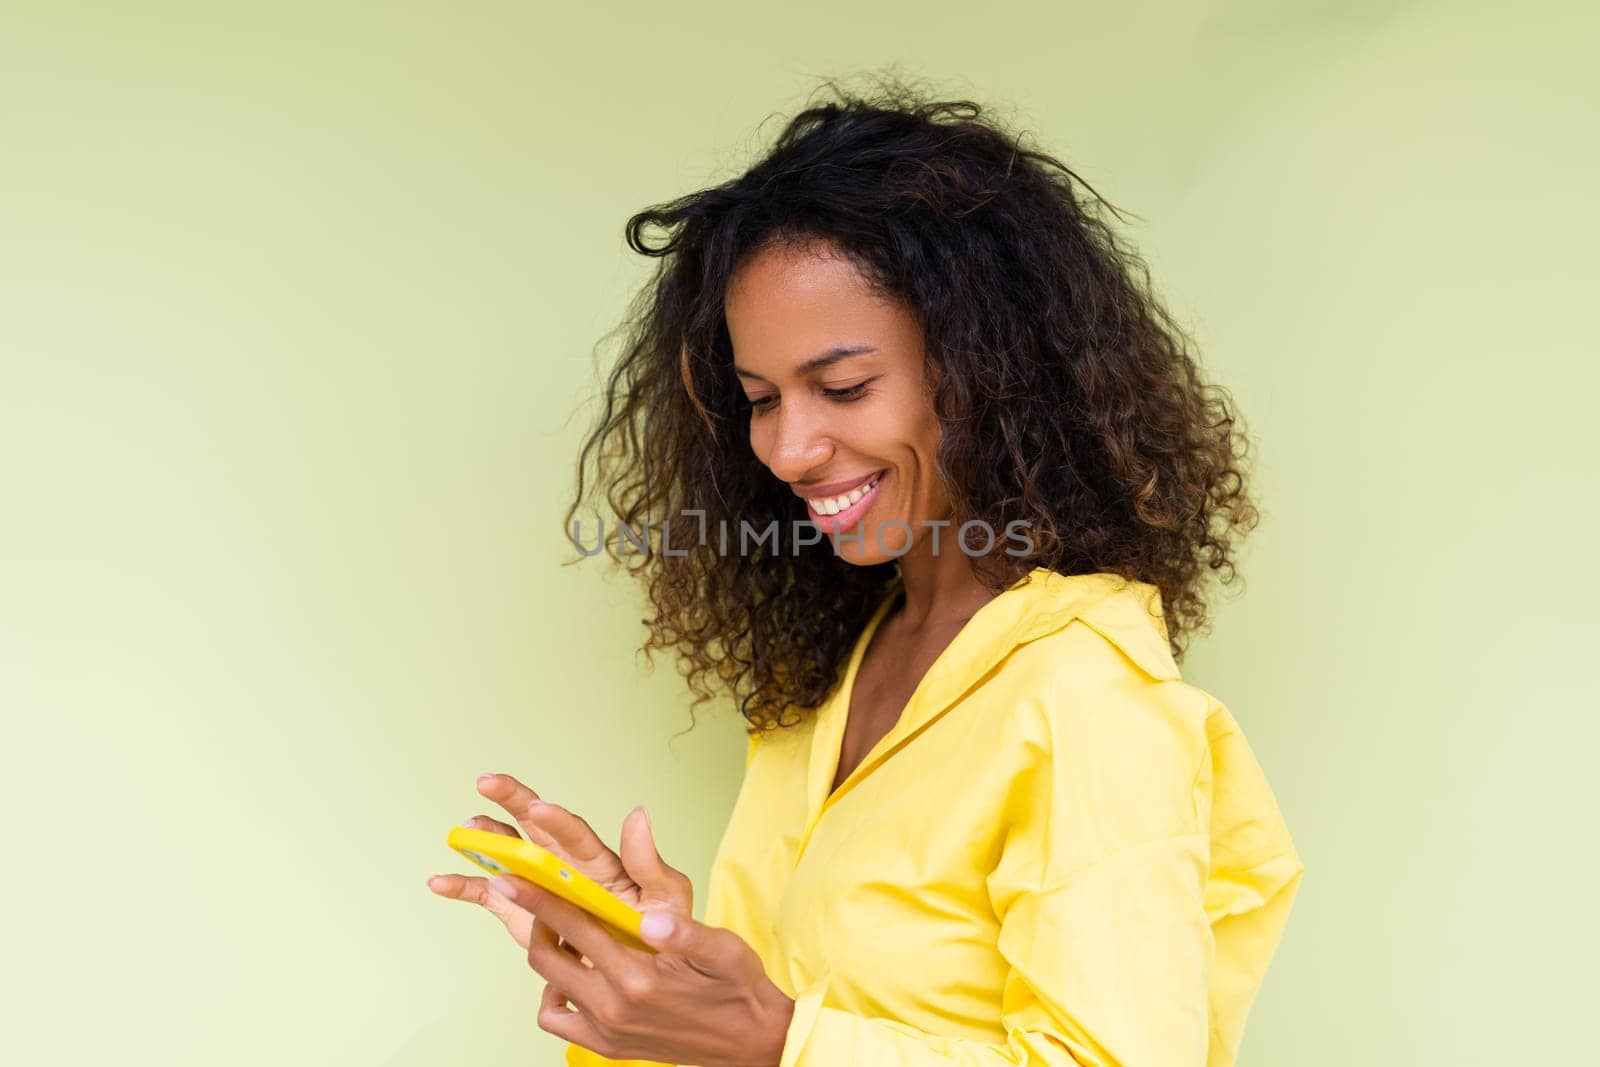 Beautiful african american woman in casual shirt on green background holds mobile phone with a smile by kroshka_nastya